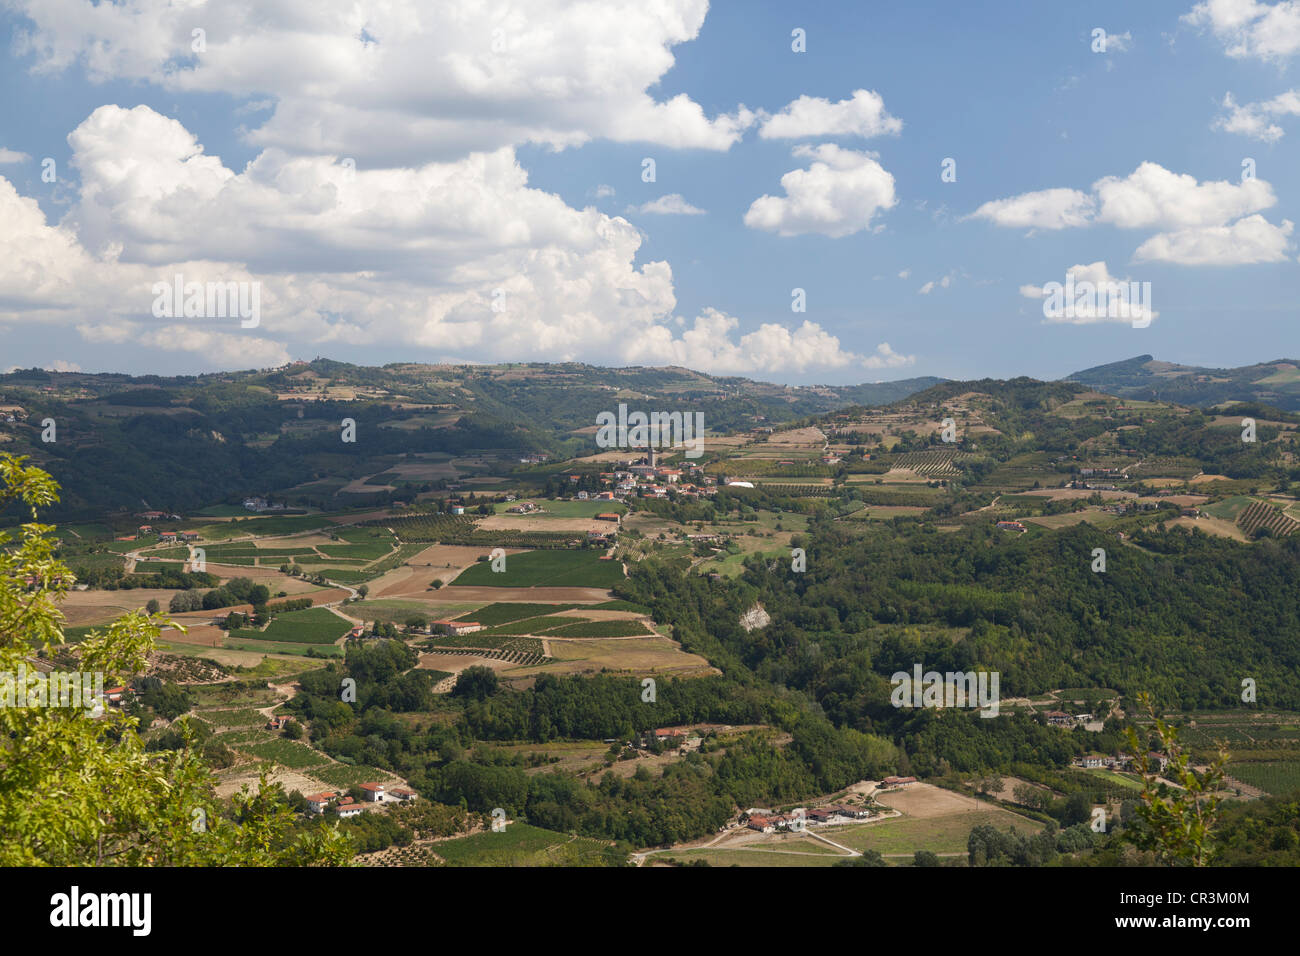 Hilly landscape near Castino, Cuneo, Piedmont, Italy, Europe Stock Photo